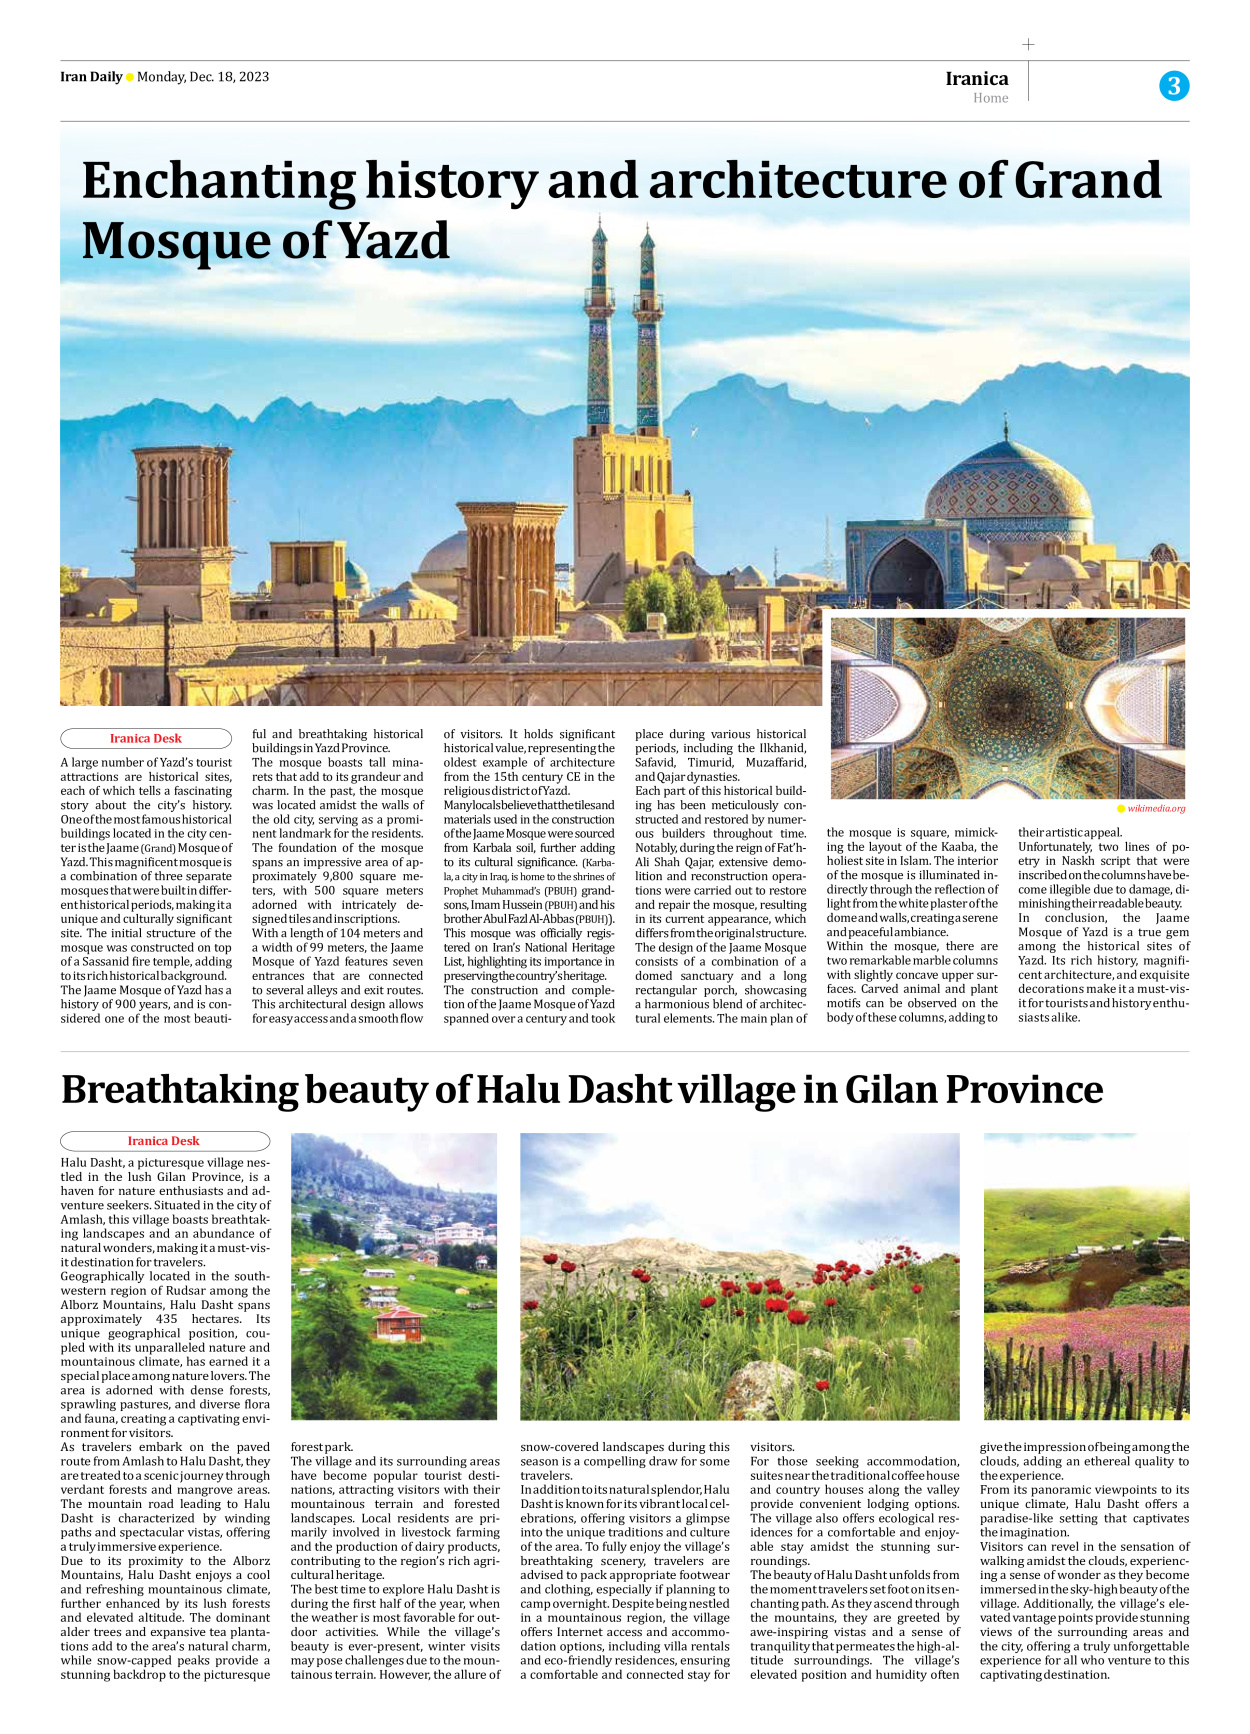 Iran Daily - Number Seven Thousand Four Hundred and Sixty One - 18 December 2023 - Page 3